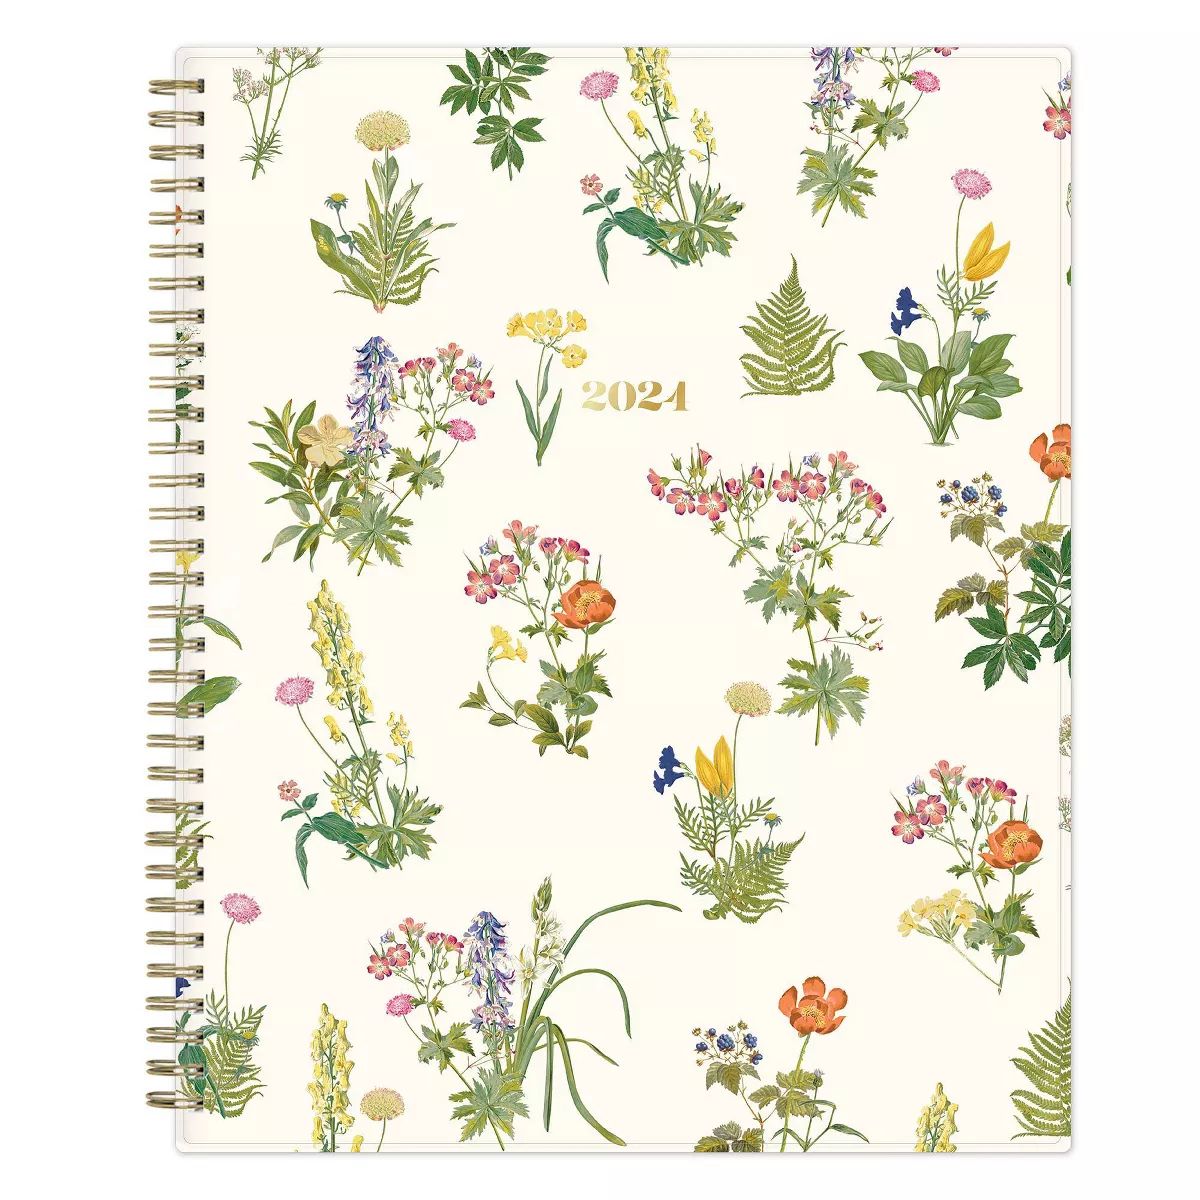 The Everygirl x Day Designer 2024 Planner 8.5"x11" Weekly/Monthly Botanica | Target